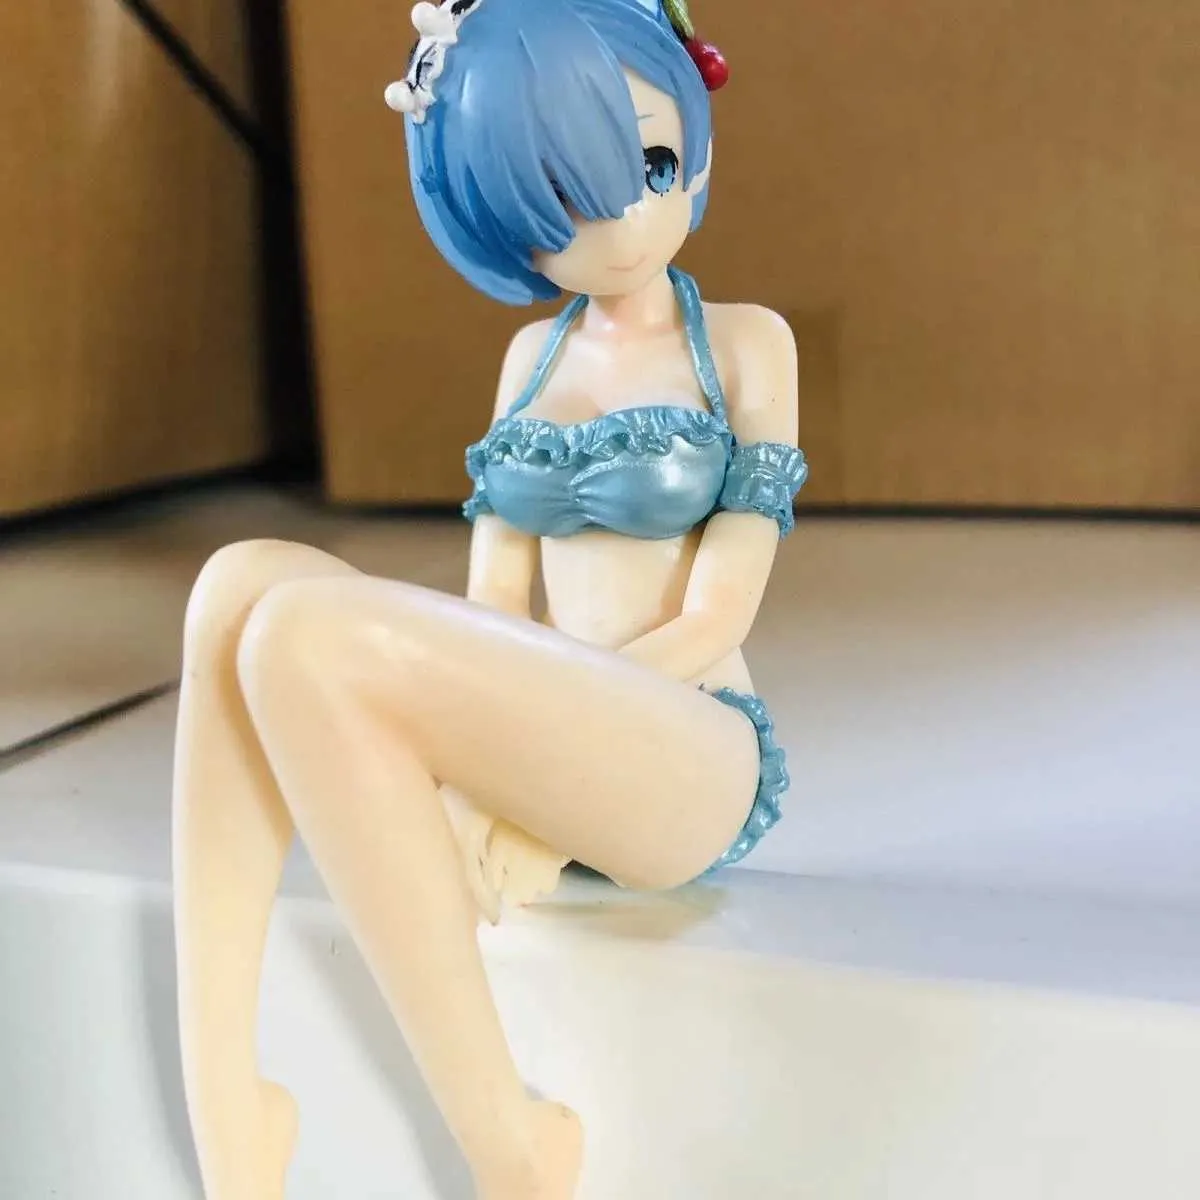 Action Toy Figures 11cm Anime Twin Girl Pink and Blue Hair Action Sitting Posture Number Collectible Model Doll Toy Gift Y240516